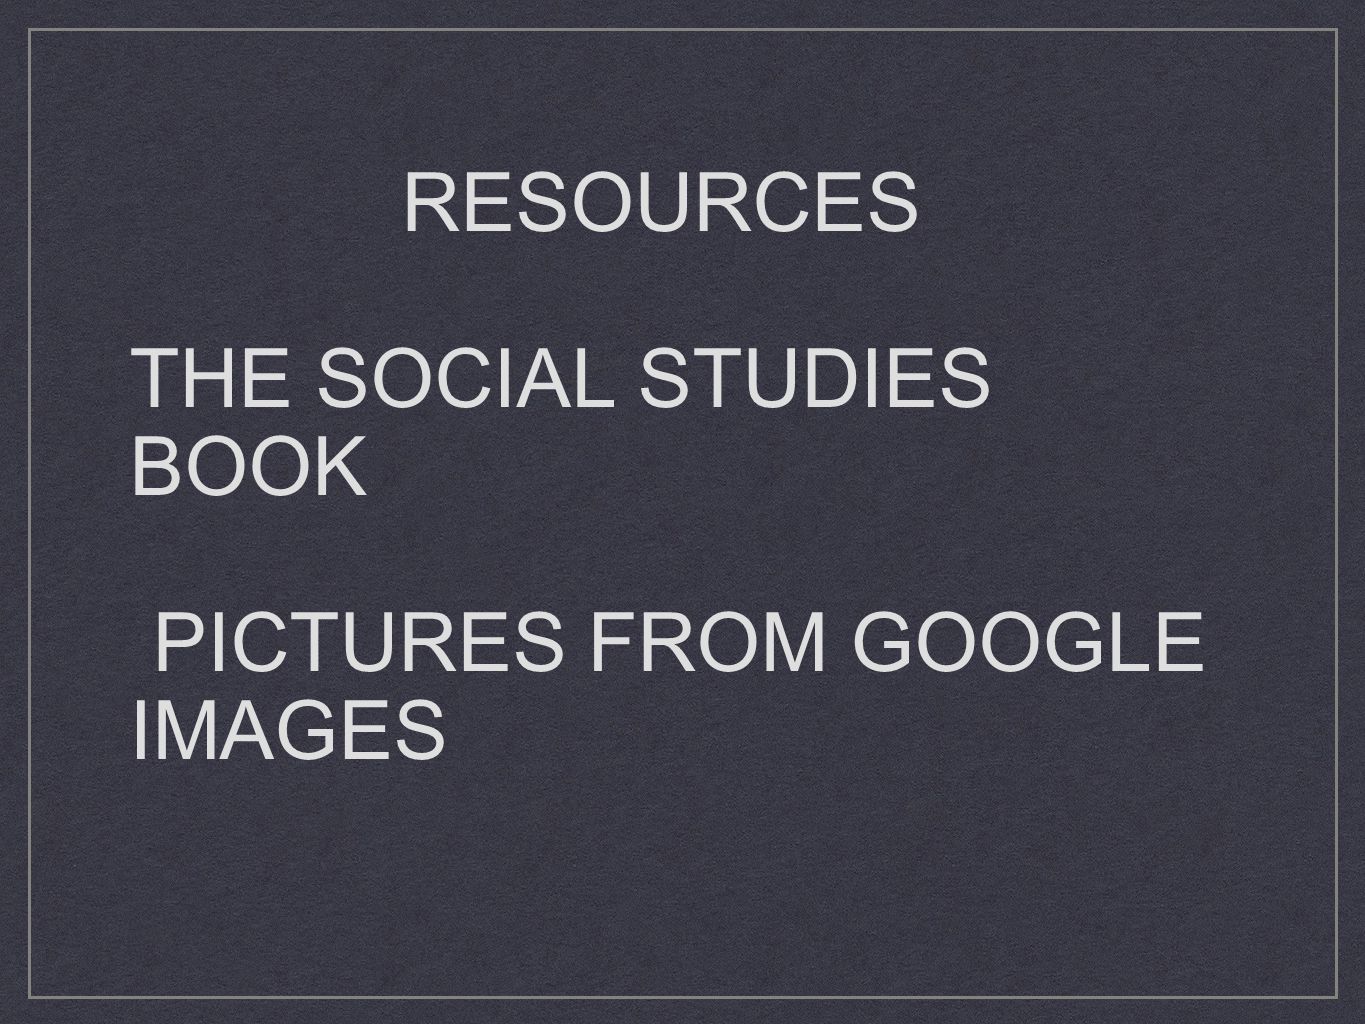 RESOURCES THE SOCIAL STUDIES BOOK PICTURES FROM GOOGLE IMAGES